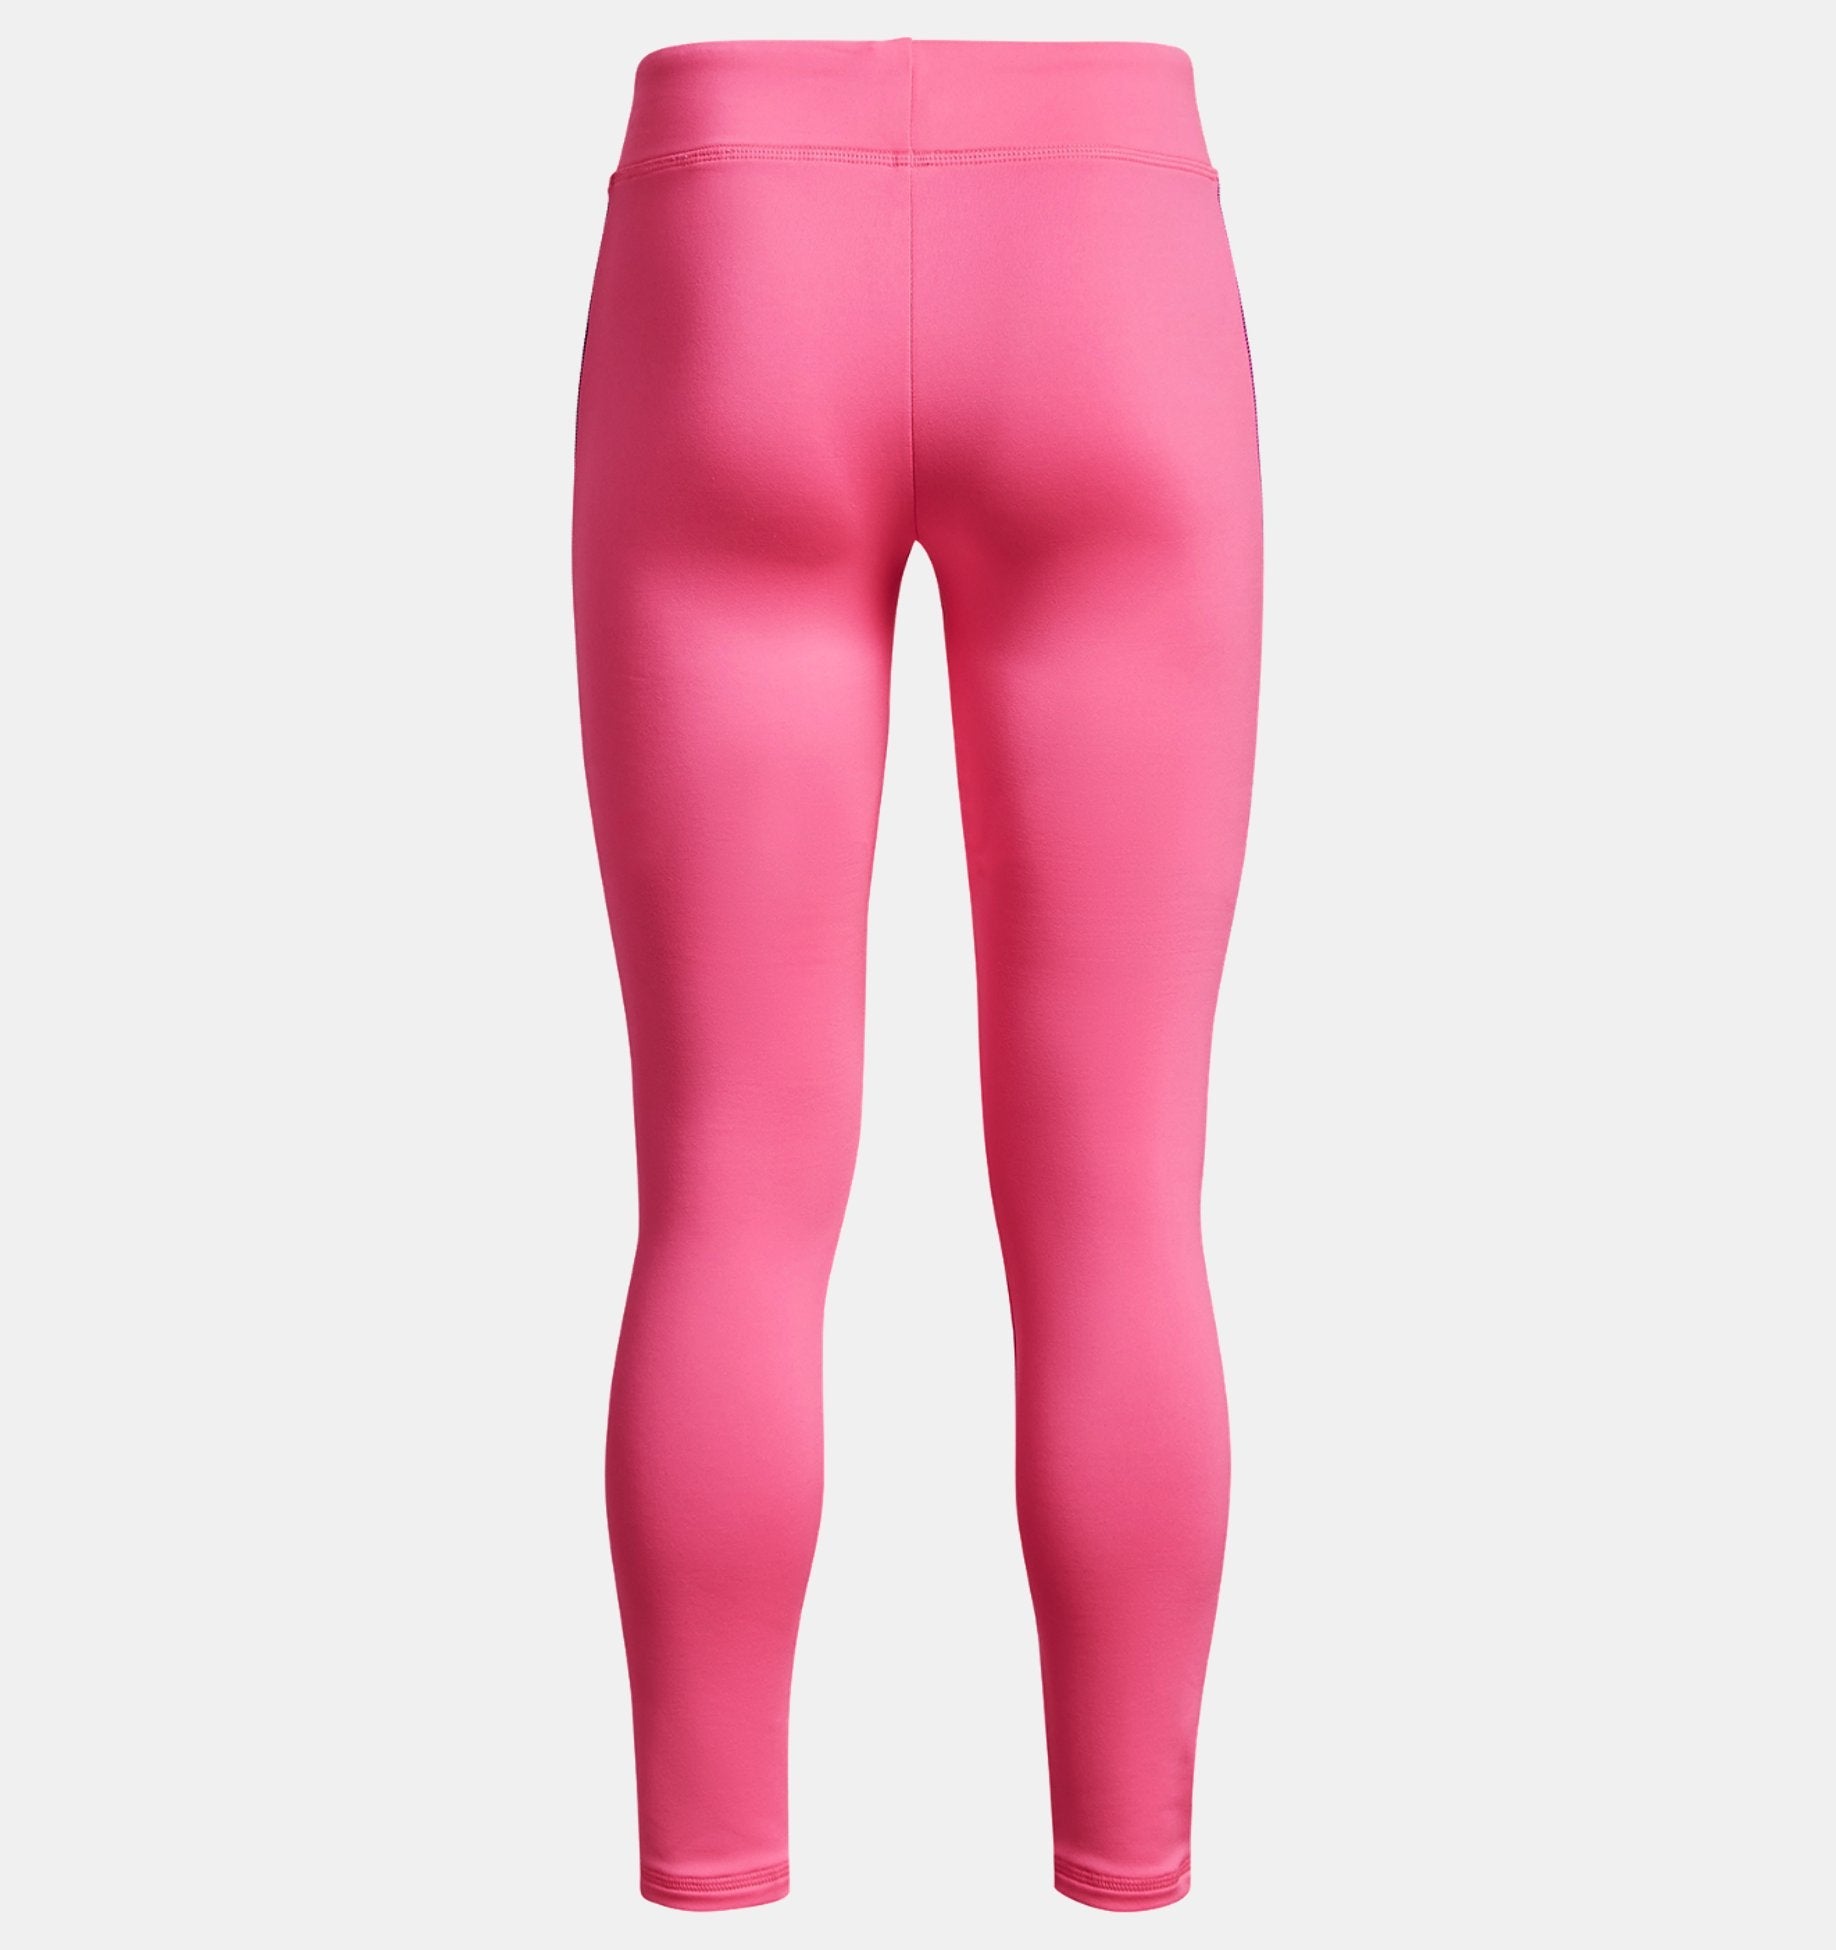 Under Armour Cold Gear Girl's Leggings-Sports Replay - Sports Excellence-Sports Replay - Sports Excellence